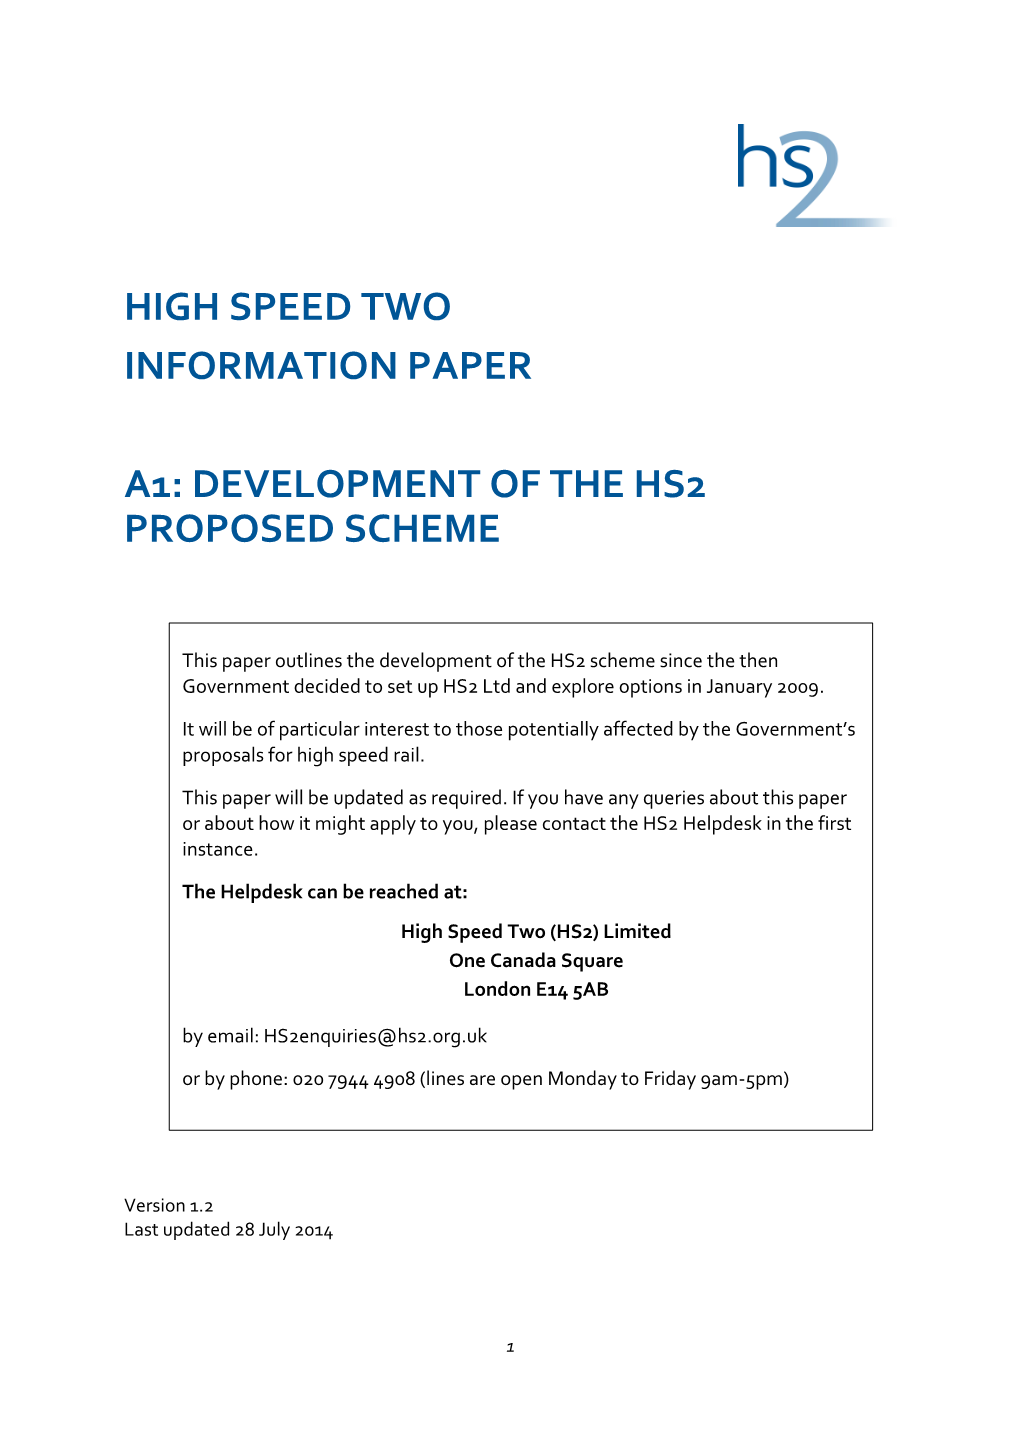 High Speed Two Information Paper A1: Development of the Hs2 Proposed